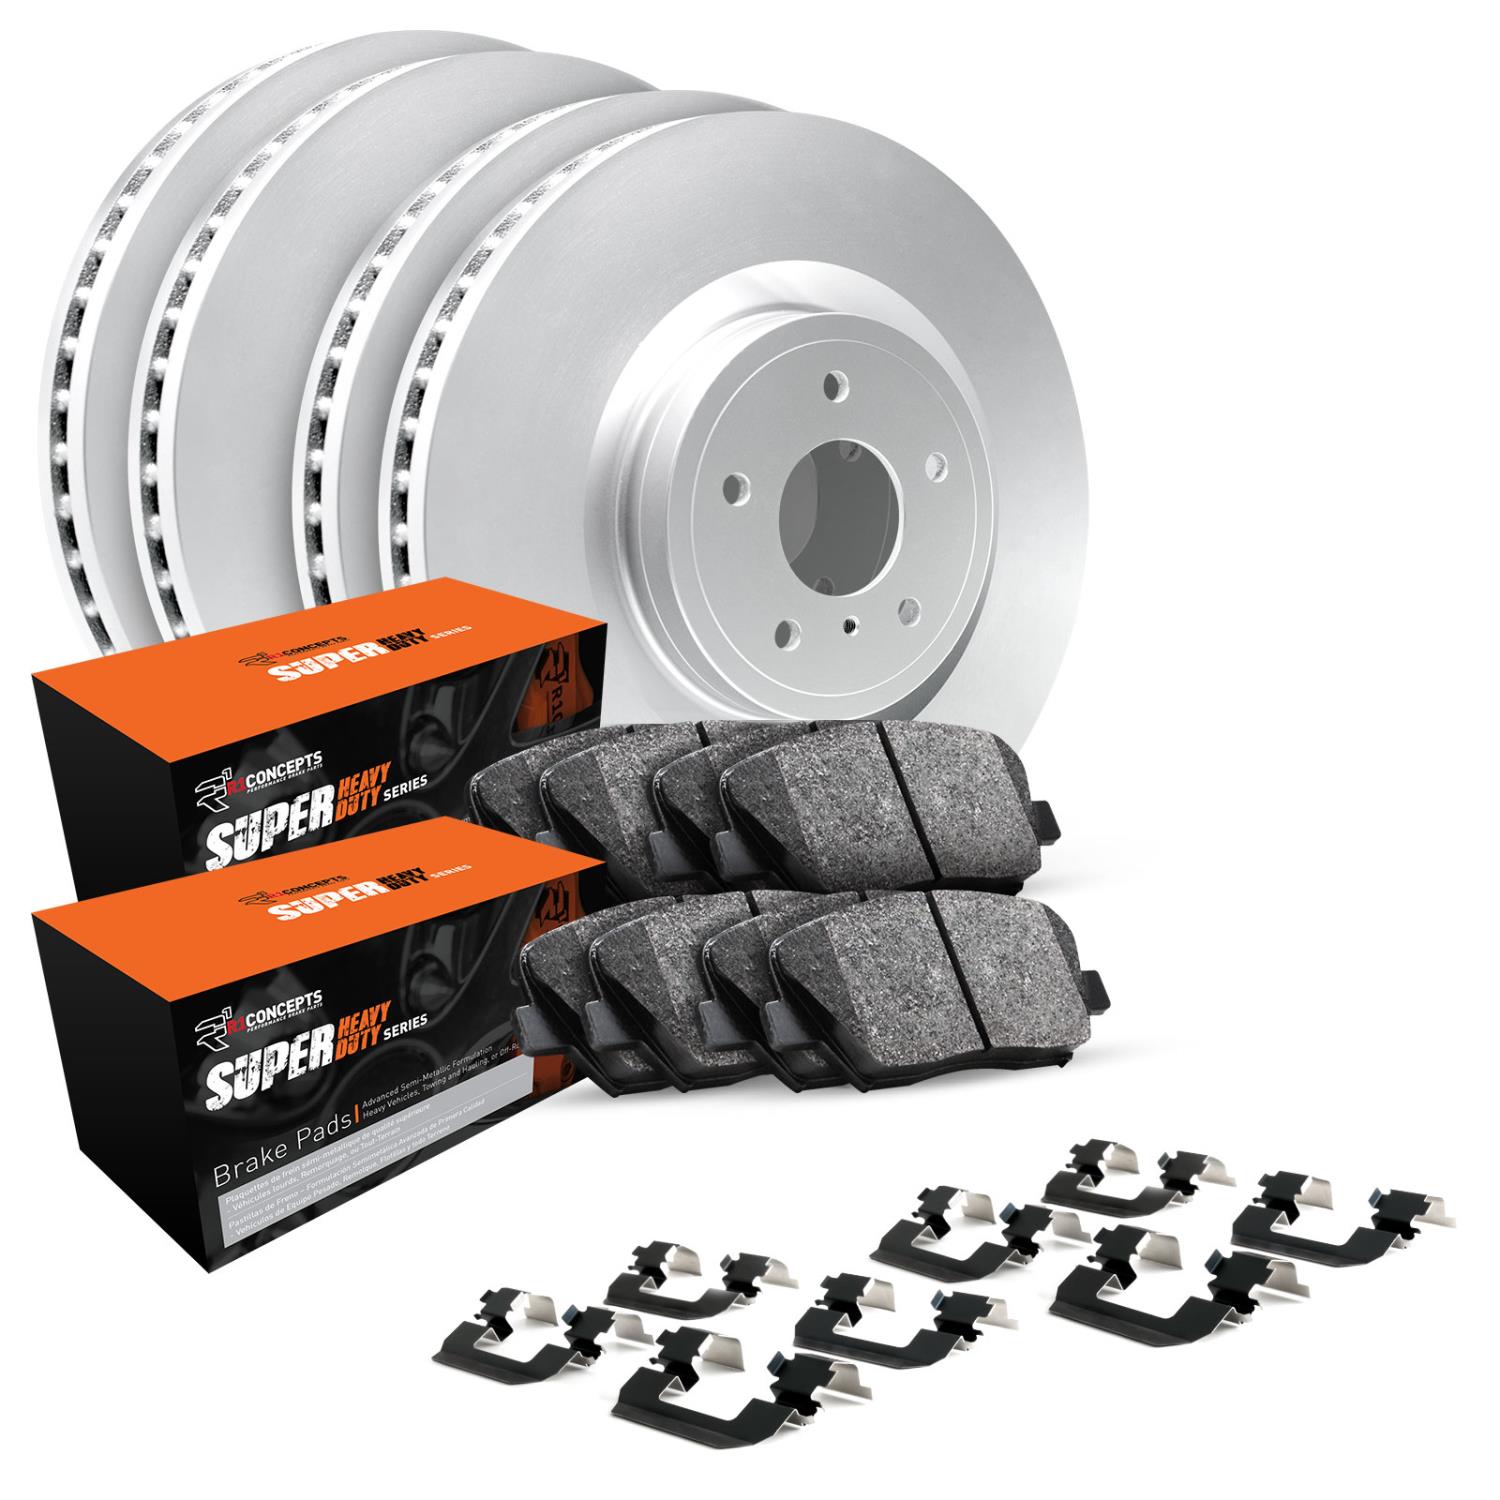 GEO-Carbon Brake Rotor Set w/Super-Duty Pads & Hardware, Fits Select Fits Multiple Makes/Models, Position: Front & Rear